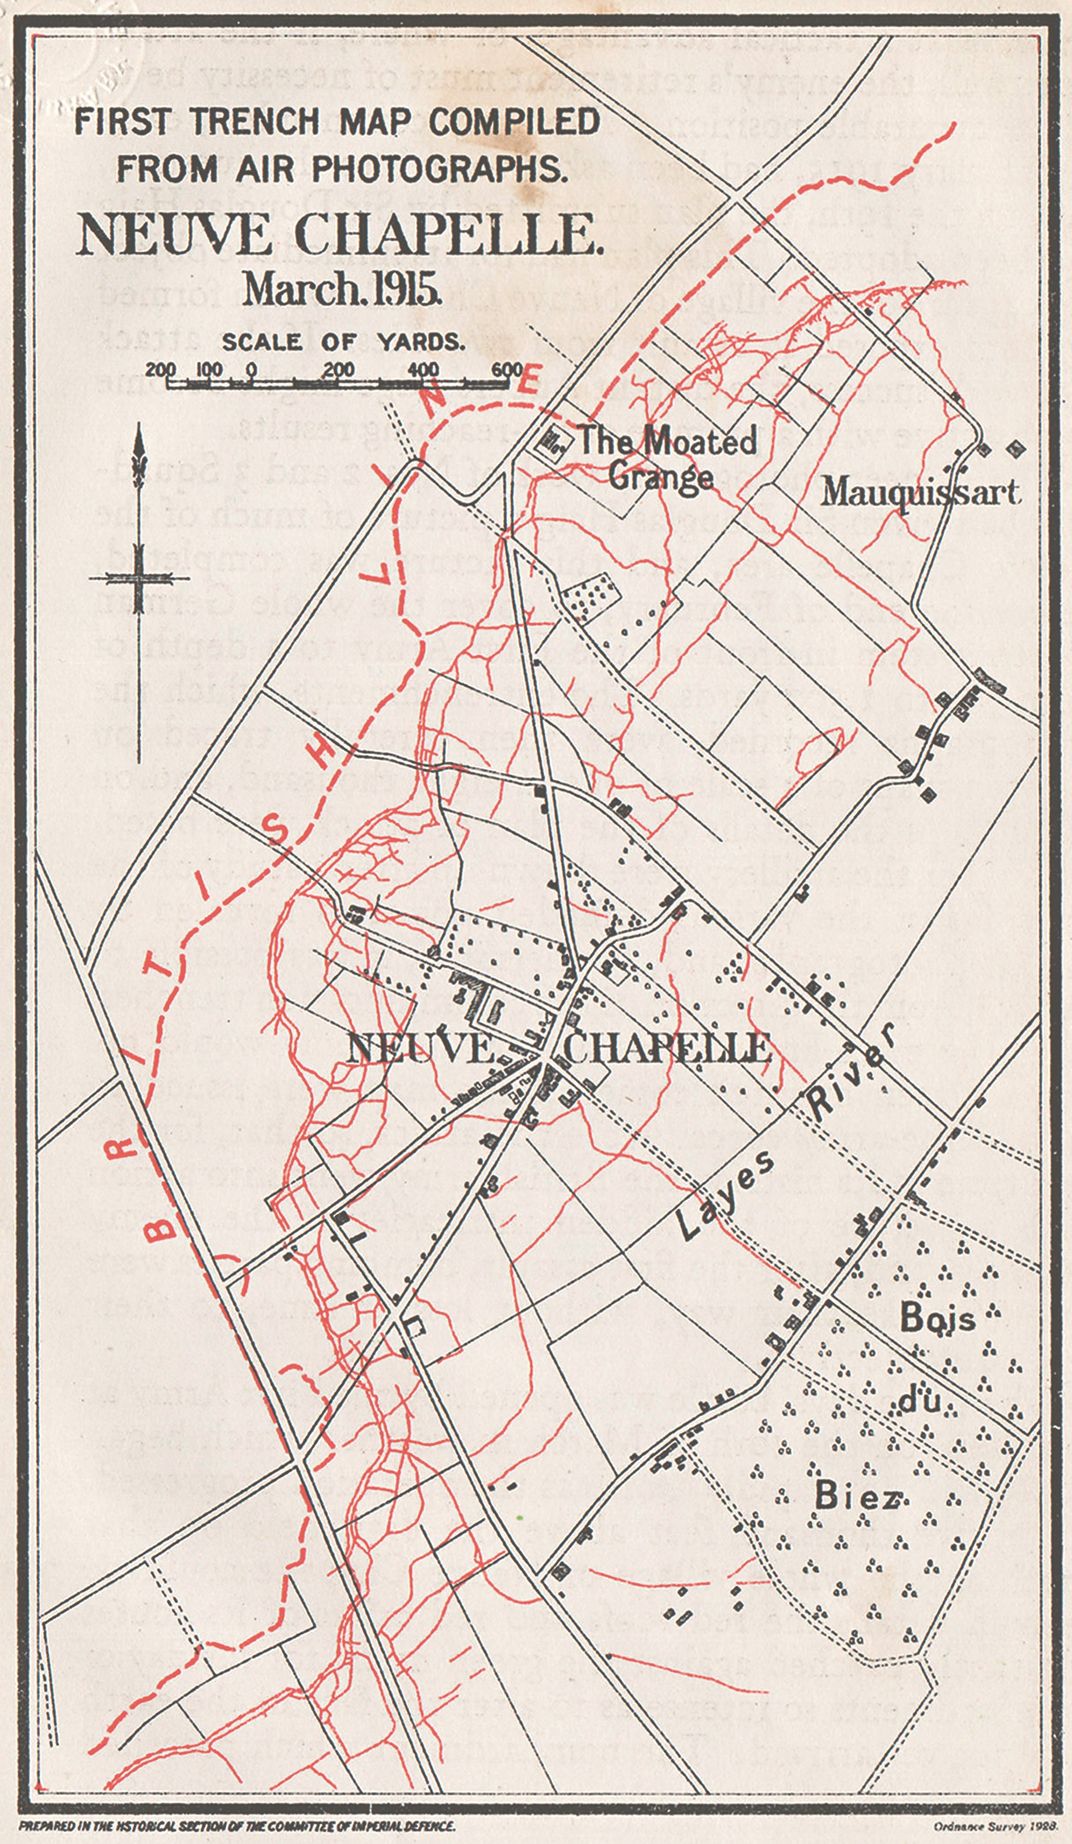 Neuve-Chapelle, France Was the First Town Ever Mapped From Aerial Photos